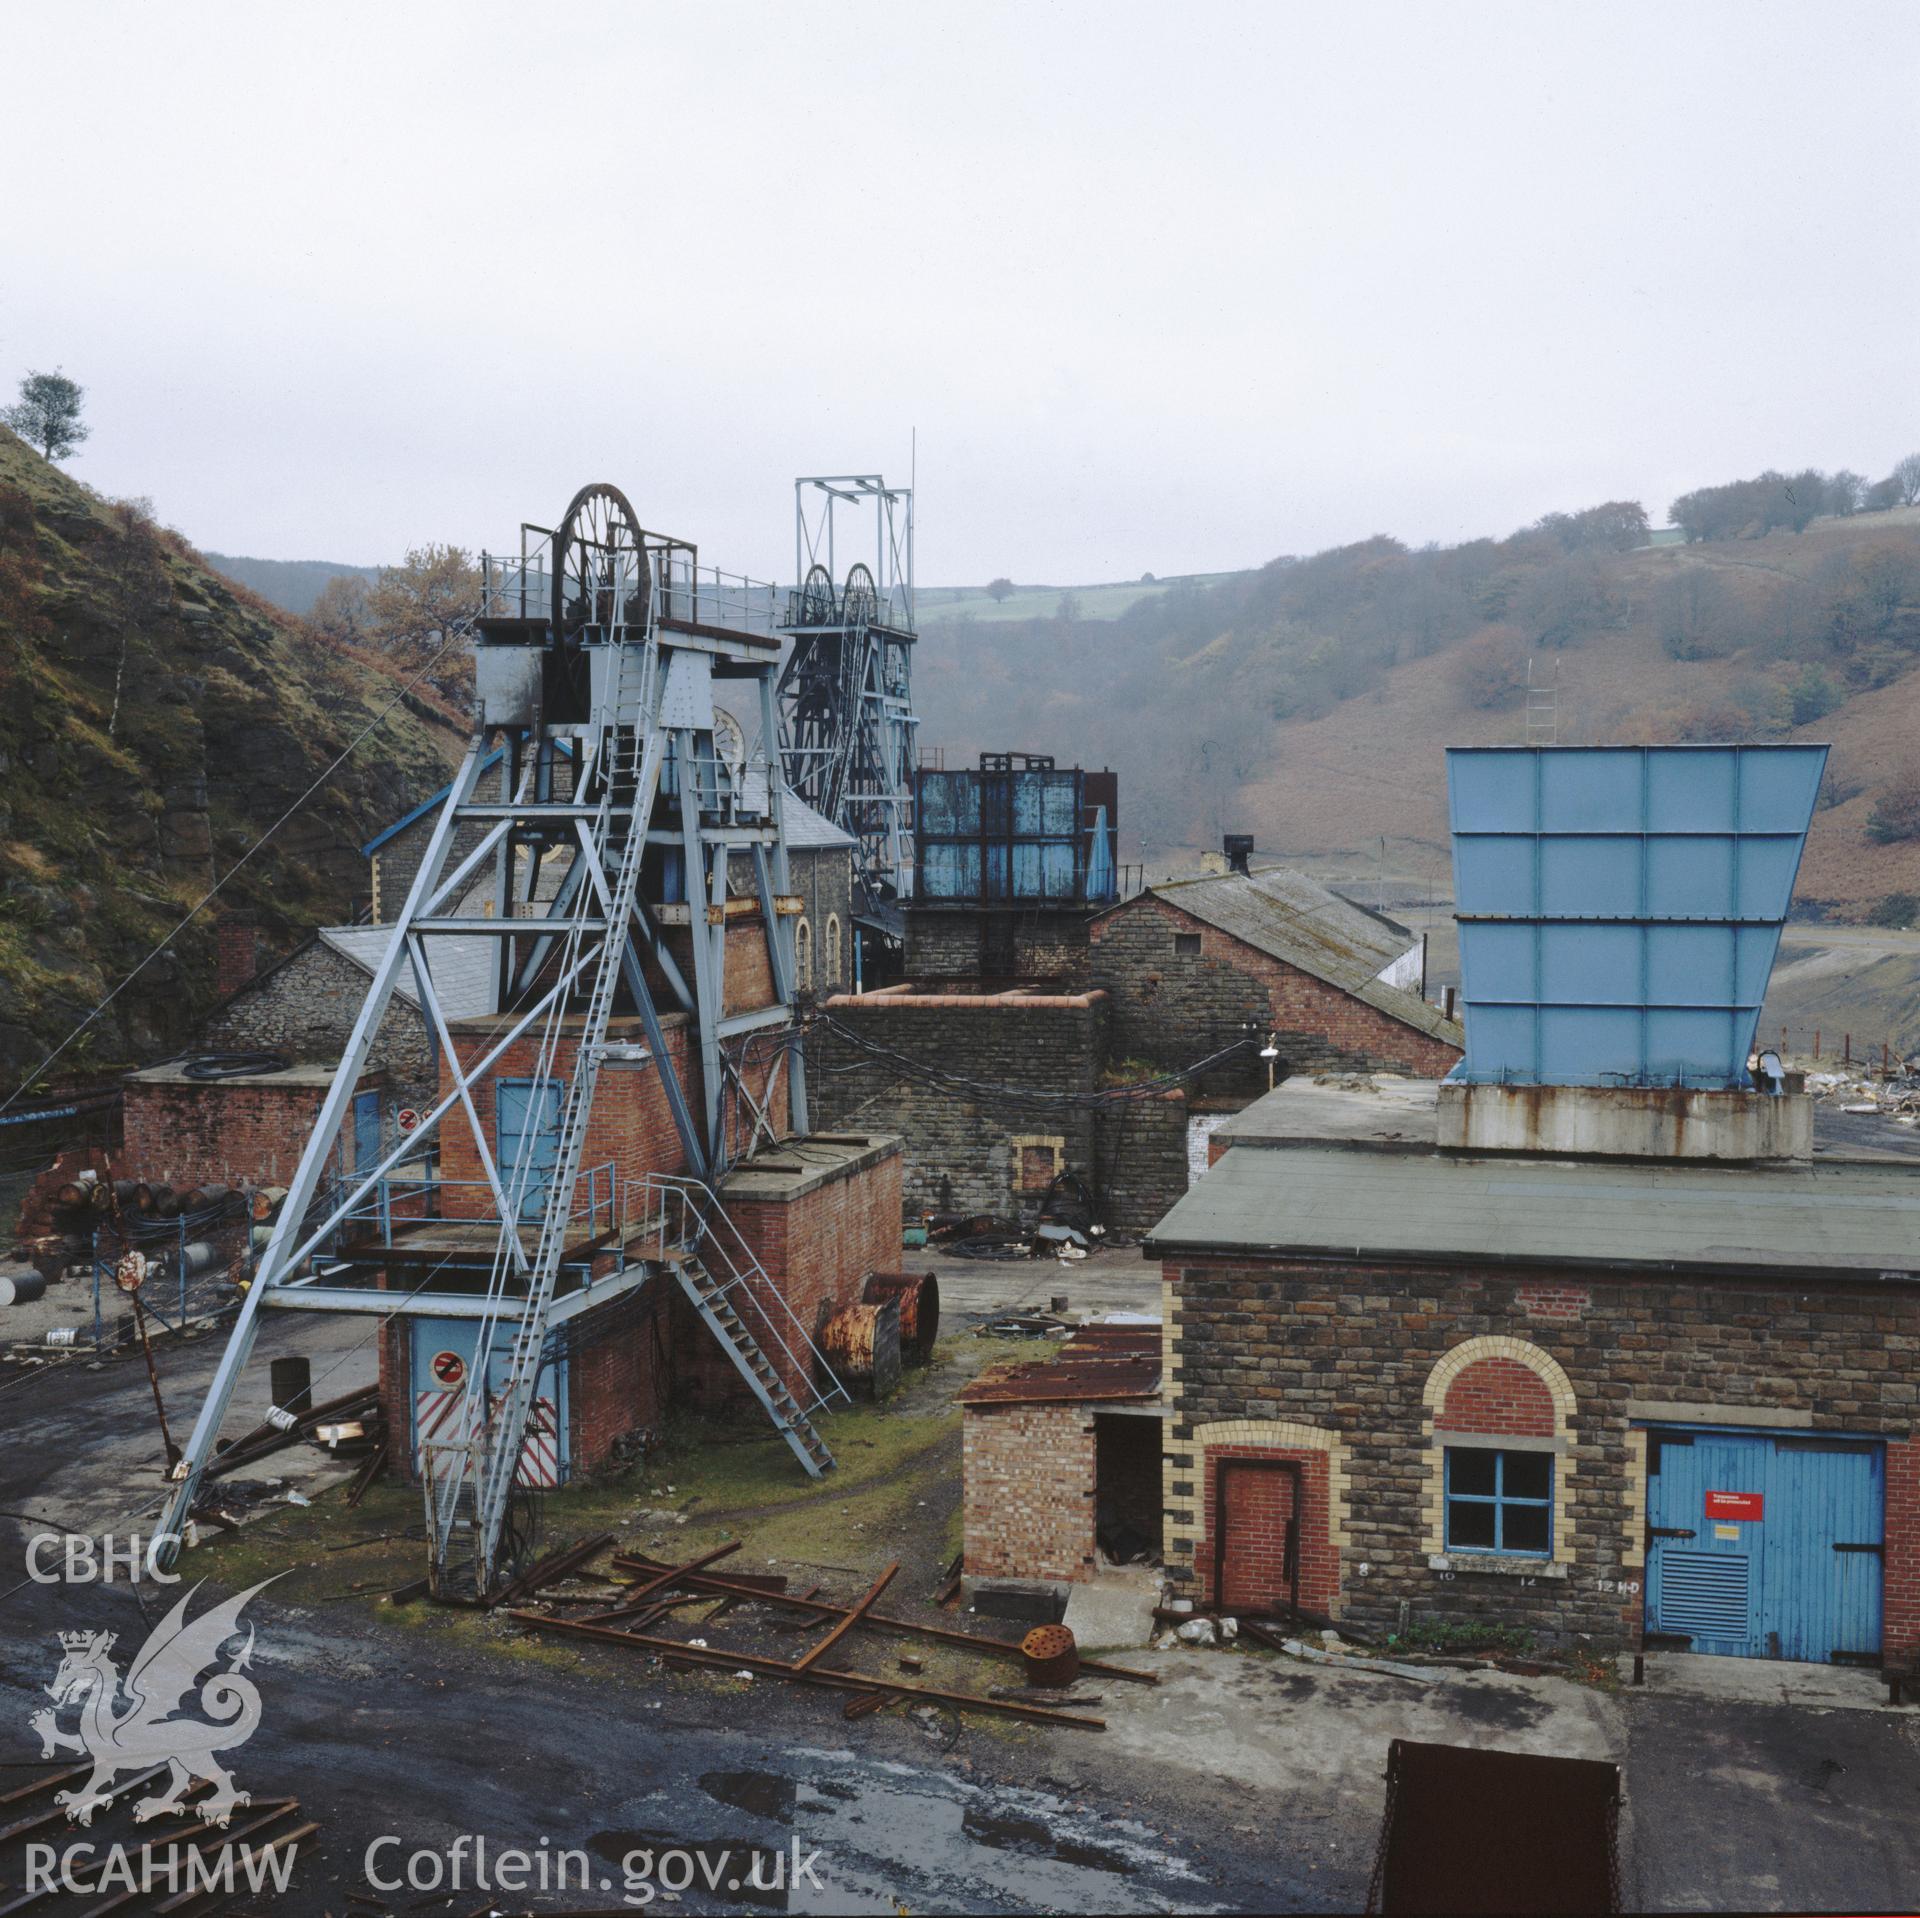 Digital copy of an acetate negative showing headframes at Blaenserchan Colliery, from the John Cornwell Collection.